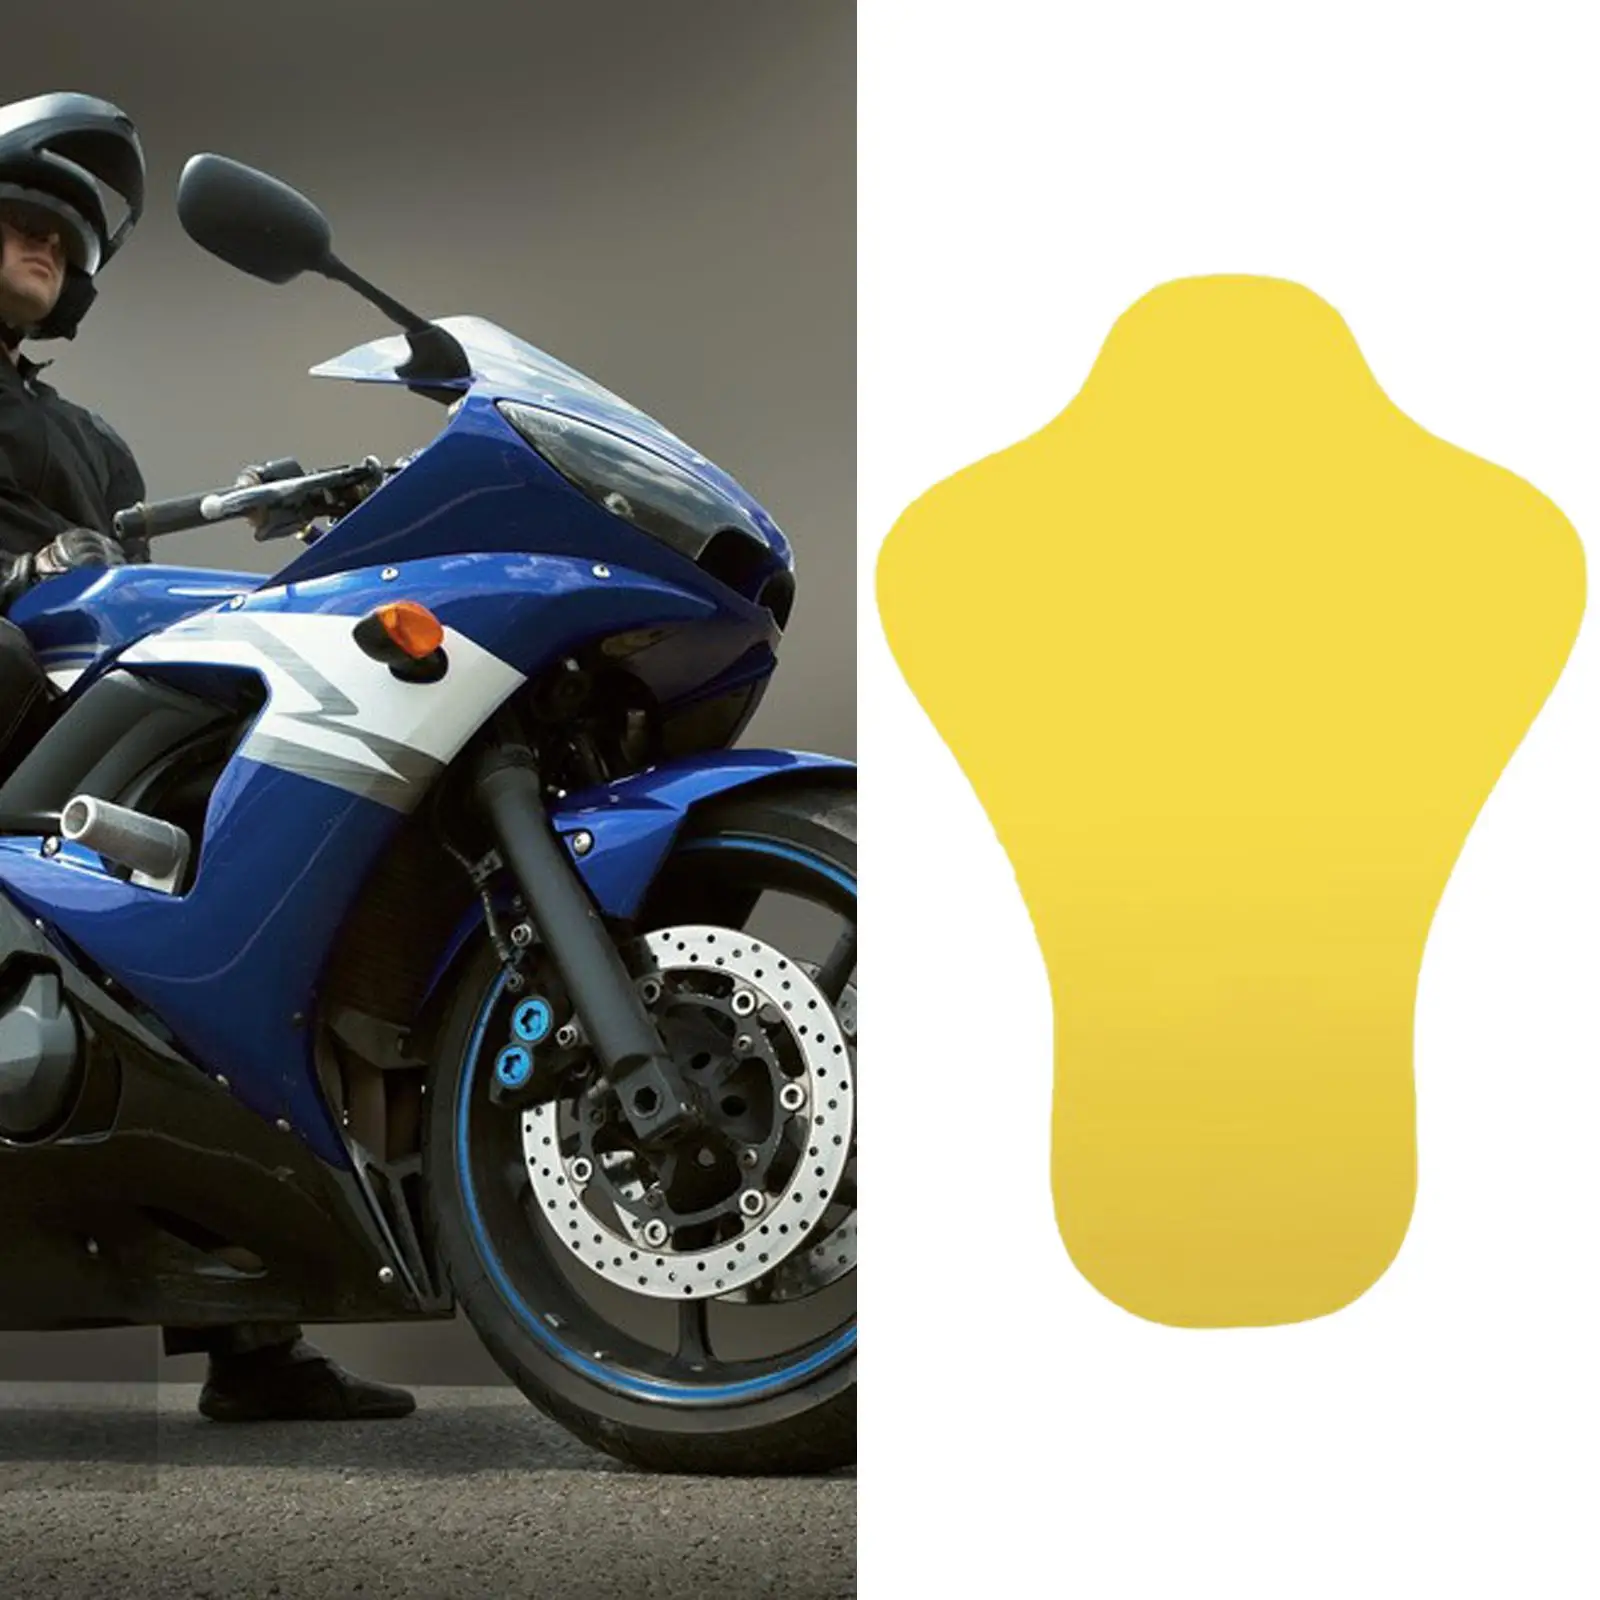   Motorcycle Jacket Insert Armor Protectors Set Back Chest Guard